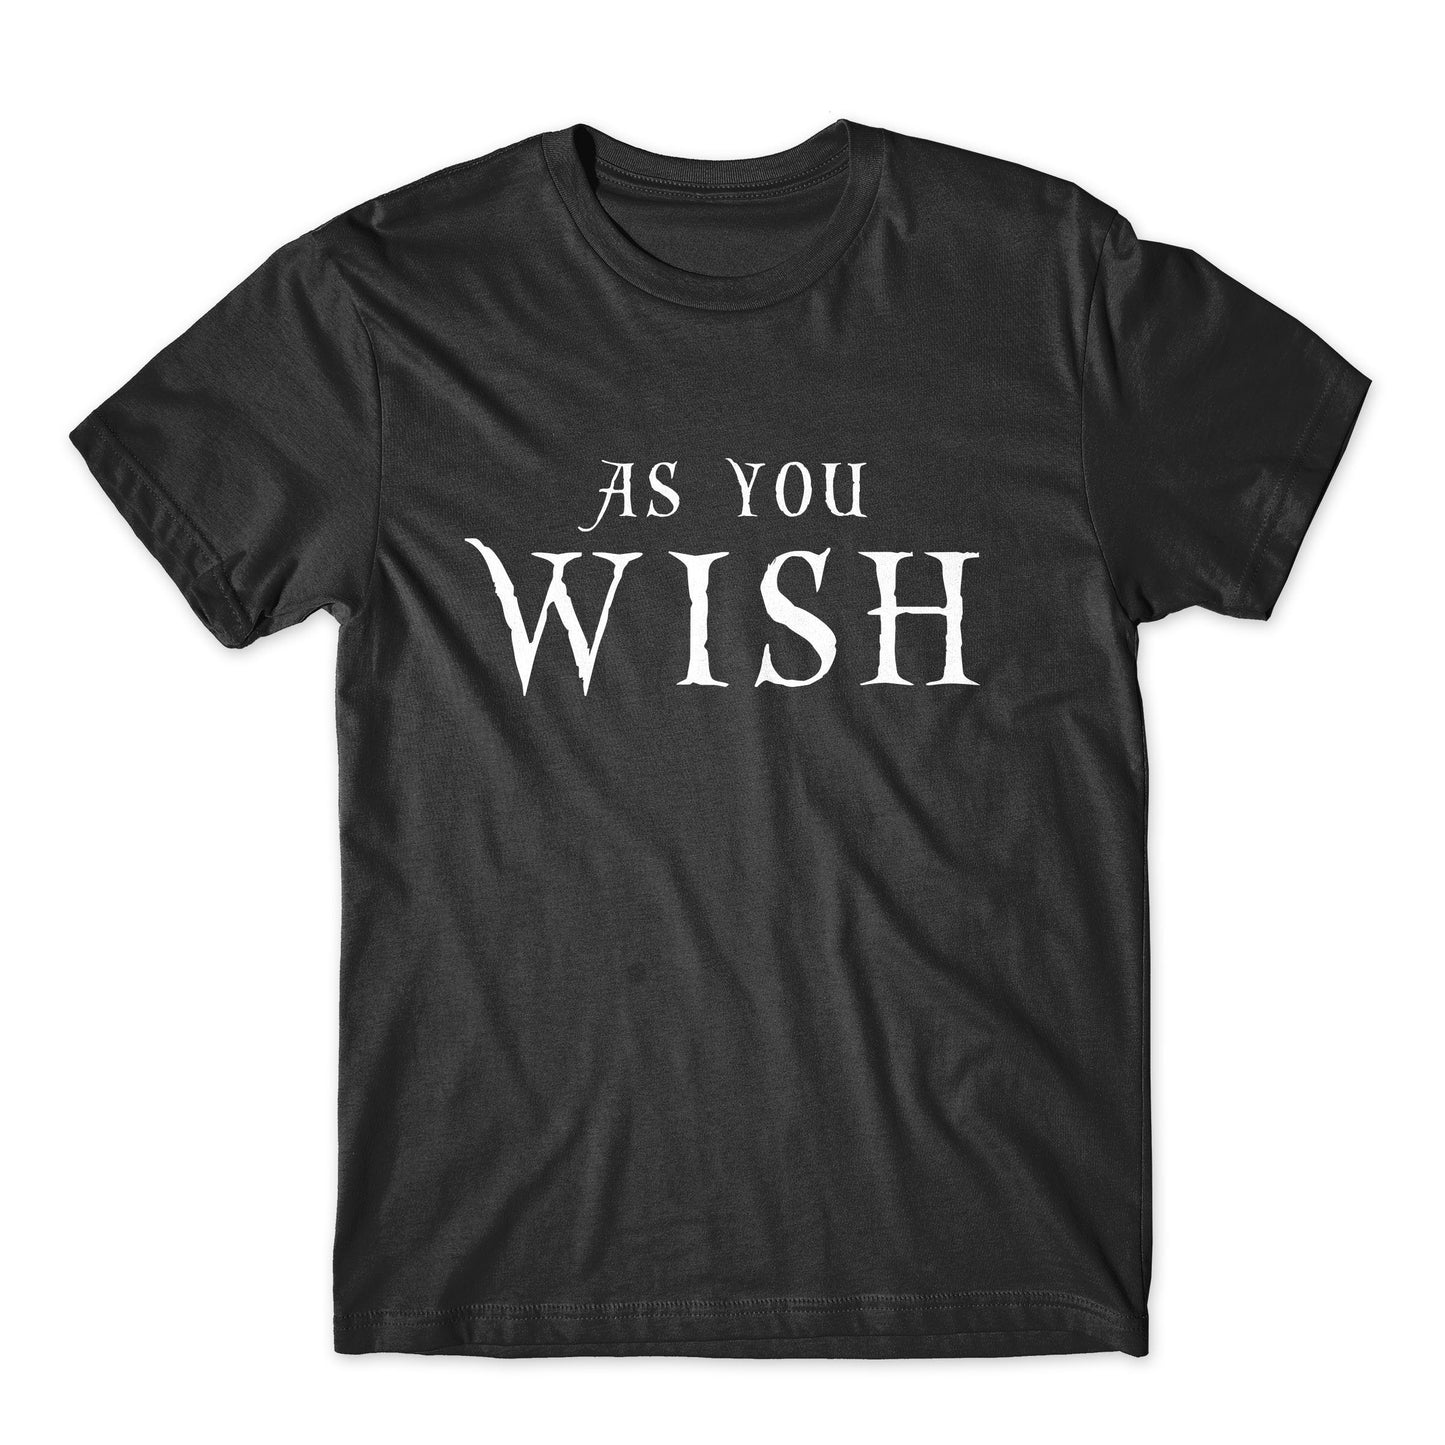 As You Wish T-Shirt. On Black, White, or Gray Soft Cotton  Premium Shirt. Princess Bride Westley and Buttercup Inspired Tee. Comfy!